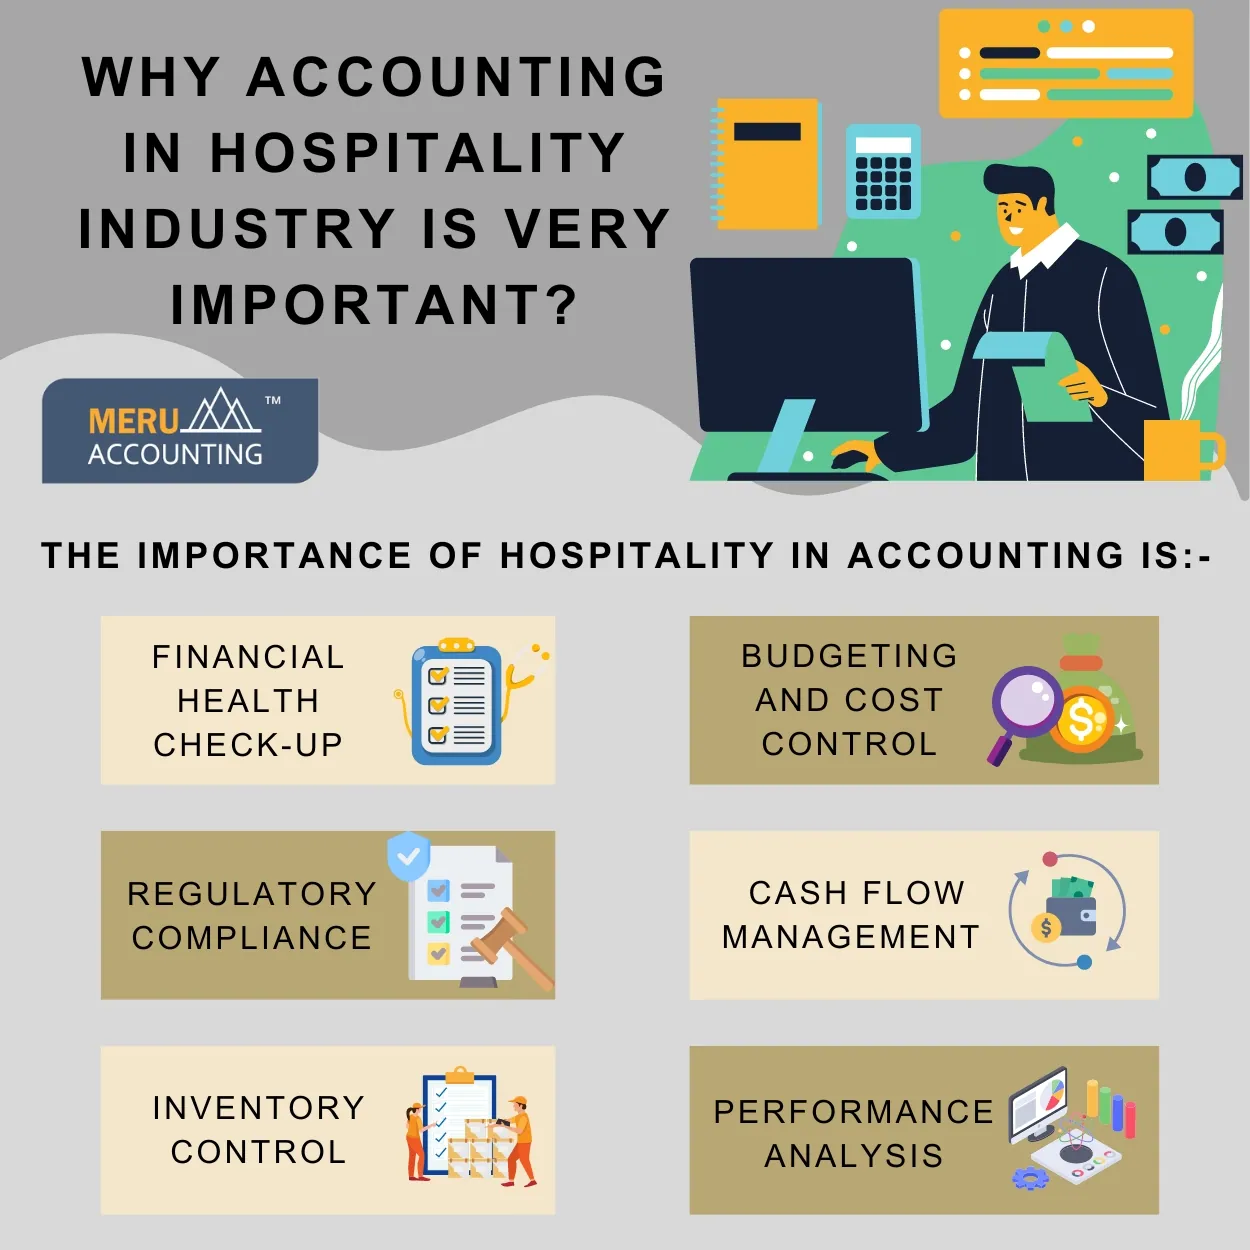 accounting in hospitality industry